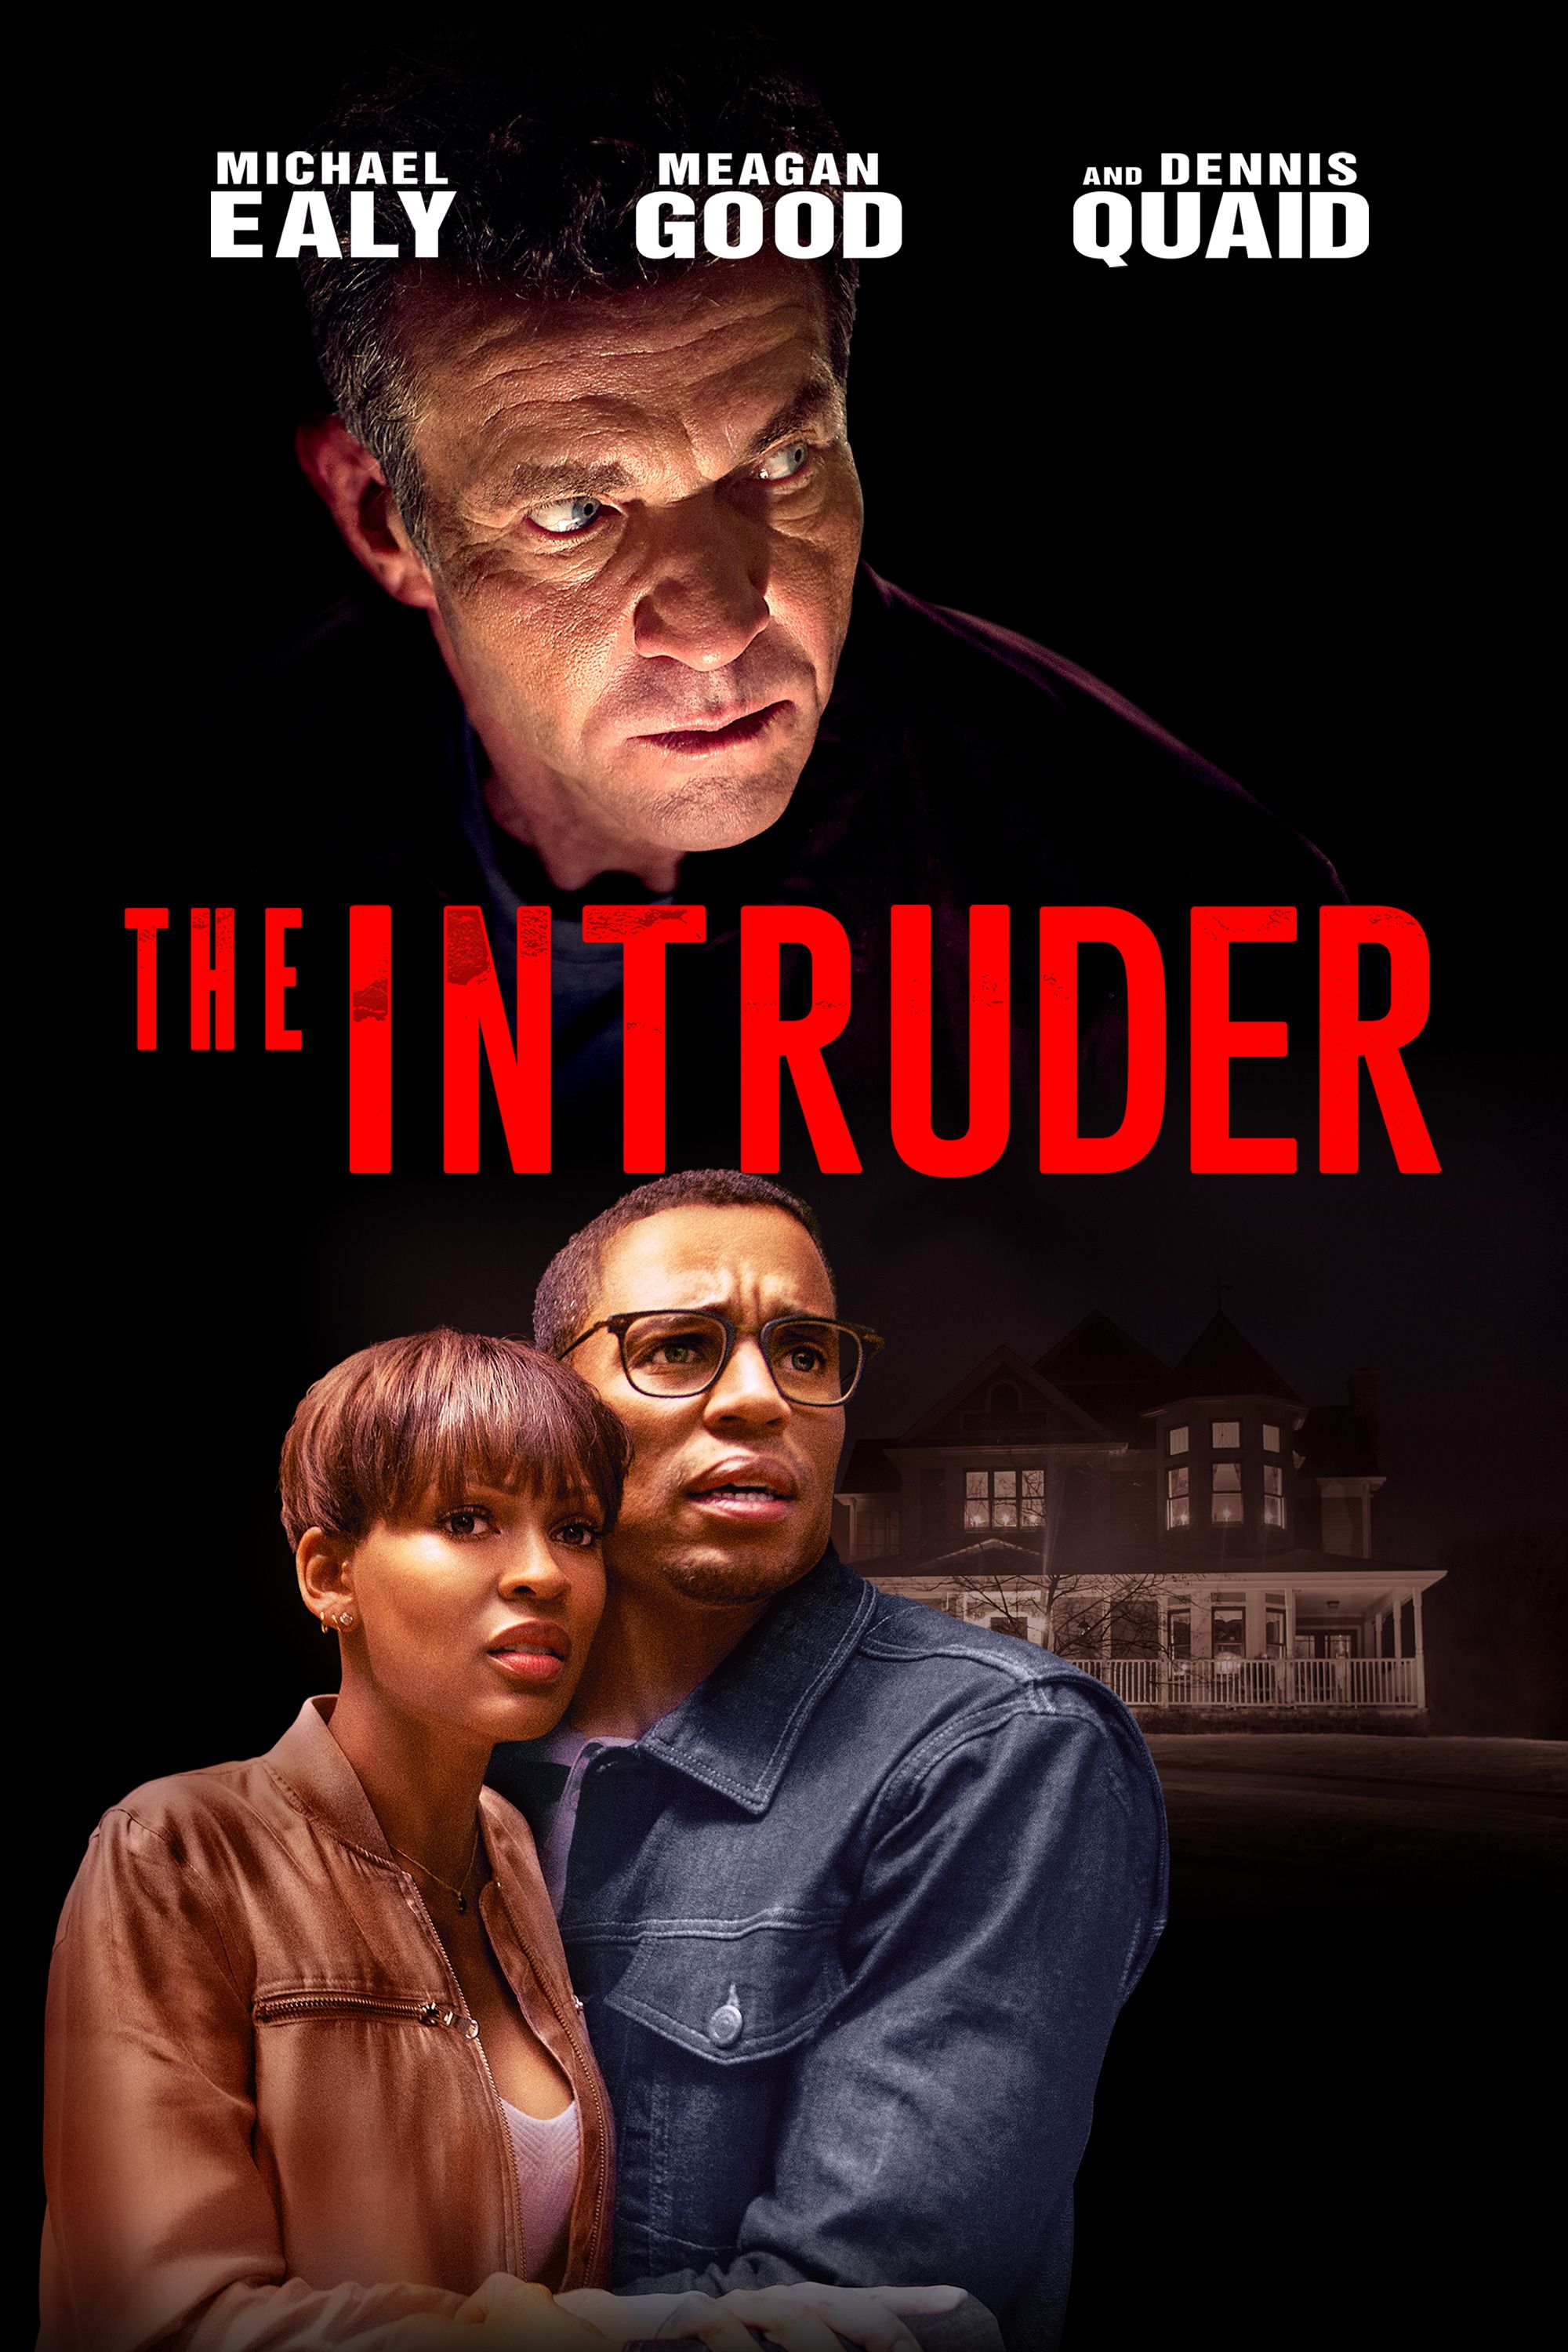 Review: Is Quaid's performance in 'The Intruder' career-ending, or a career  highlight?